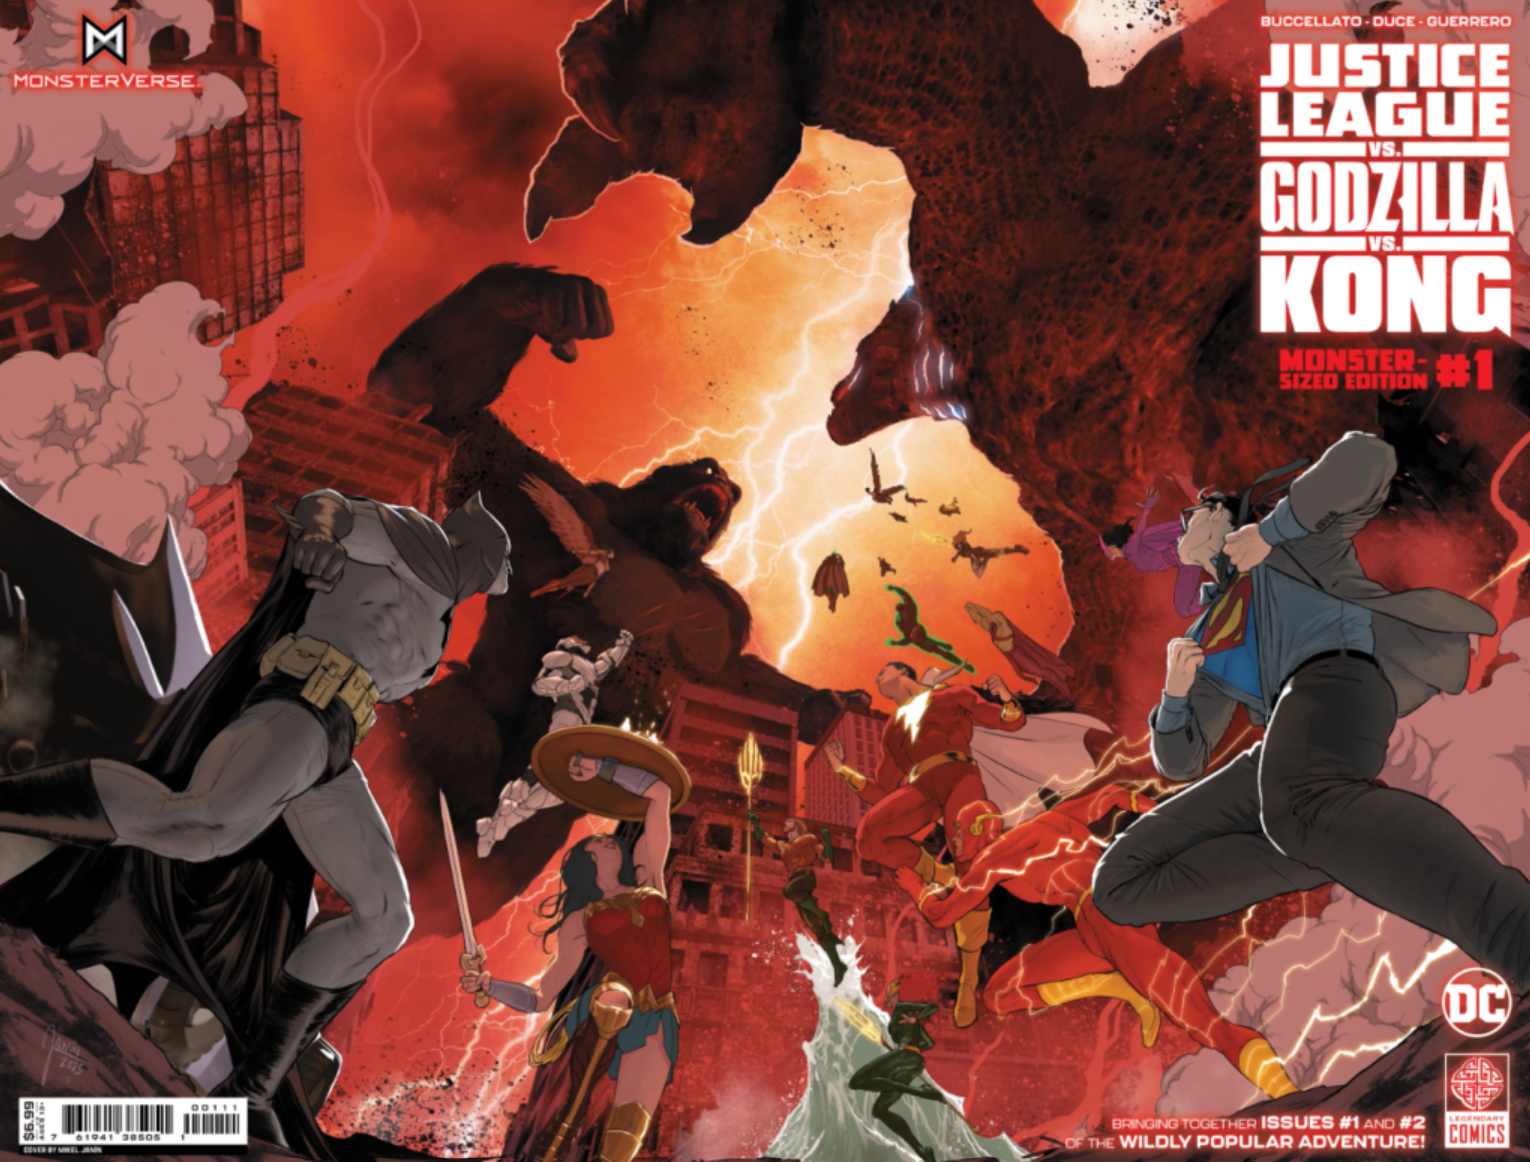 Justice League vs. Godzilla vs. Kong Goes Back to Press with a “Monster-Sized Edition”